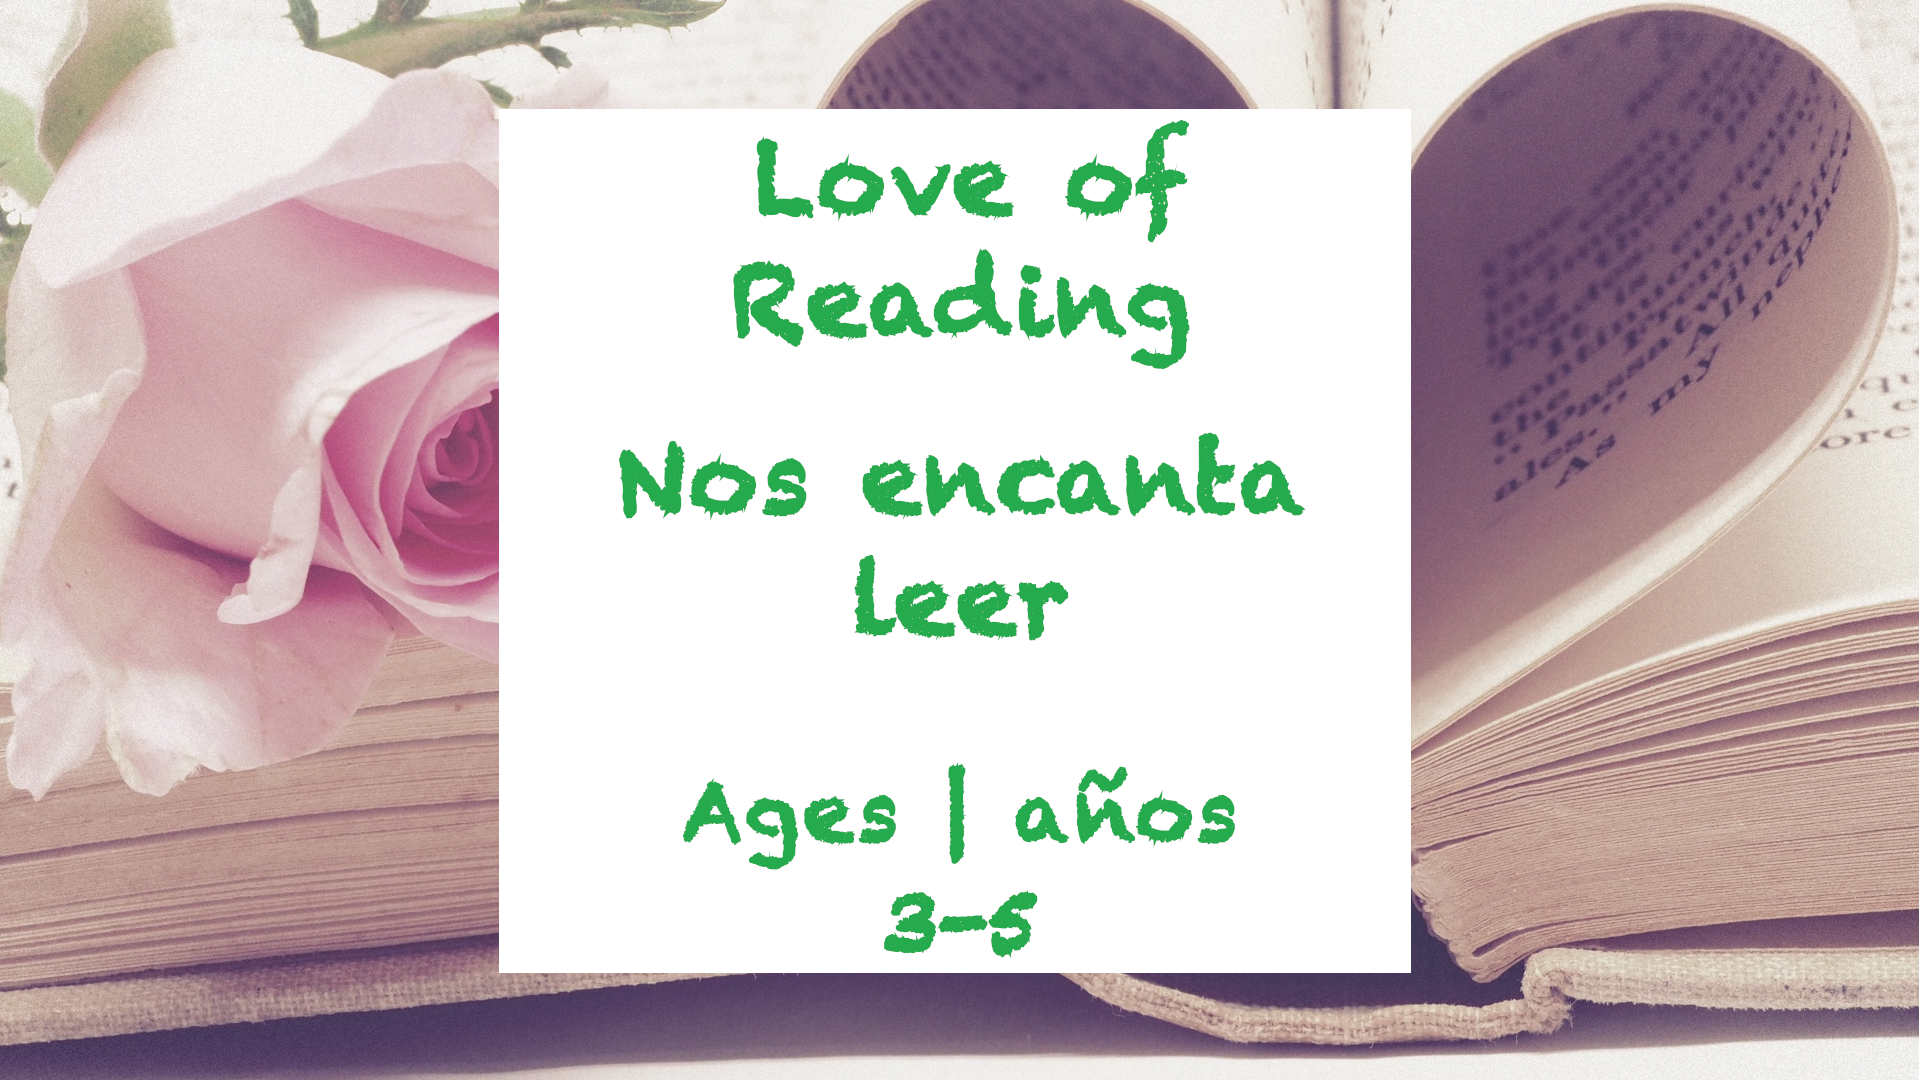 Love of Reading for 3-5 year olds